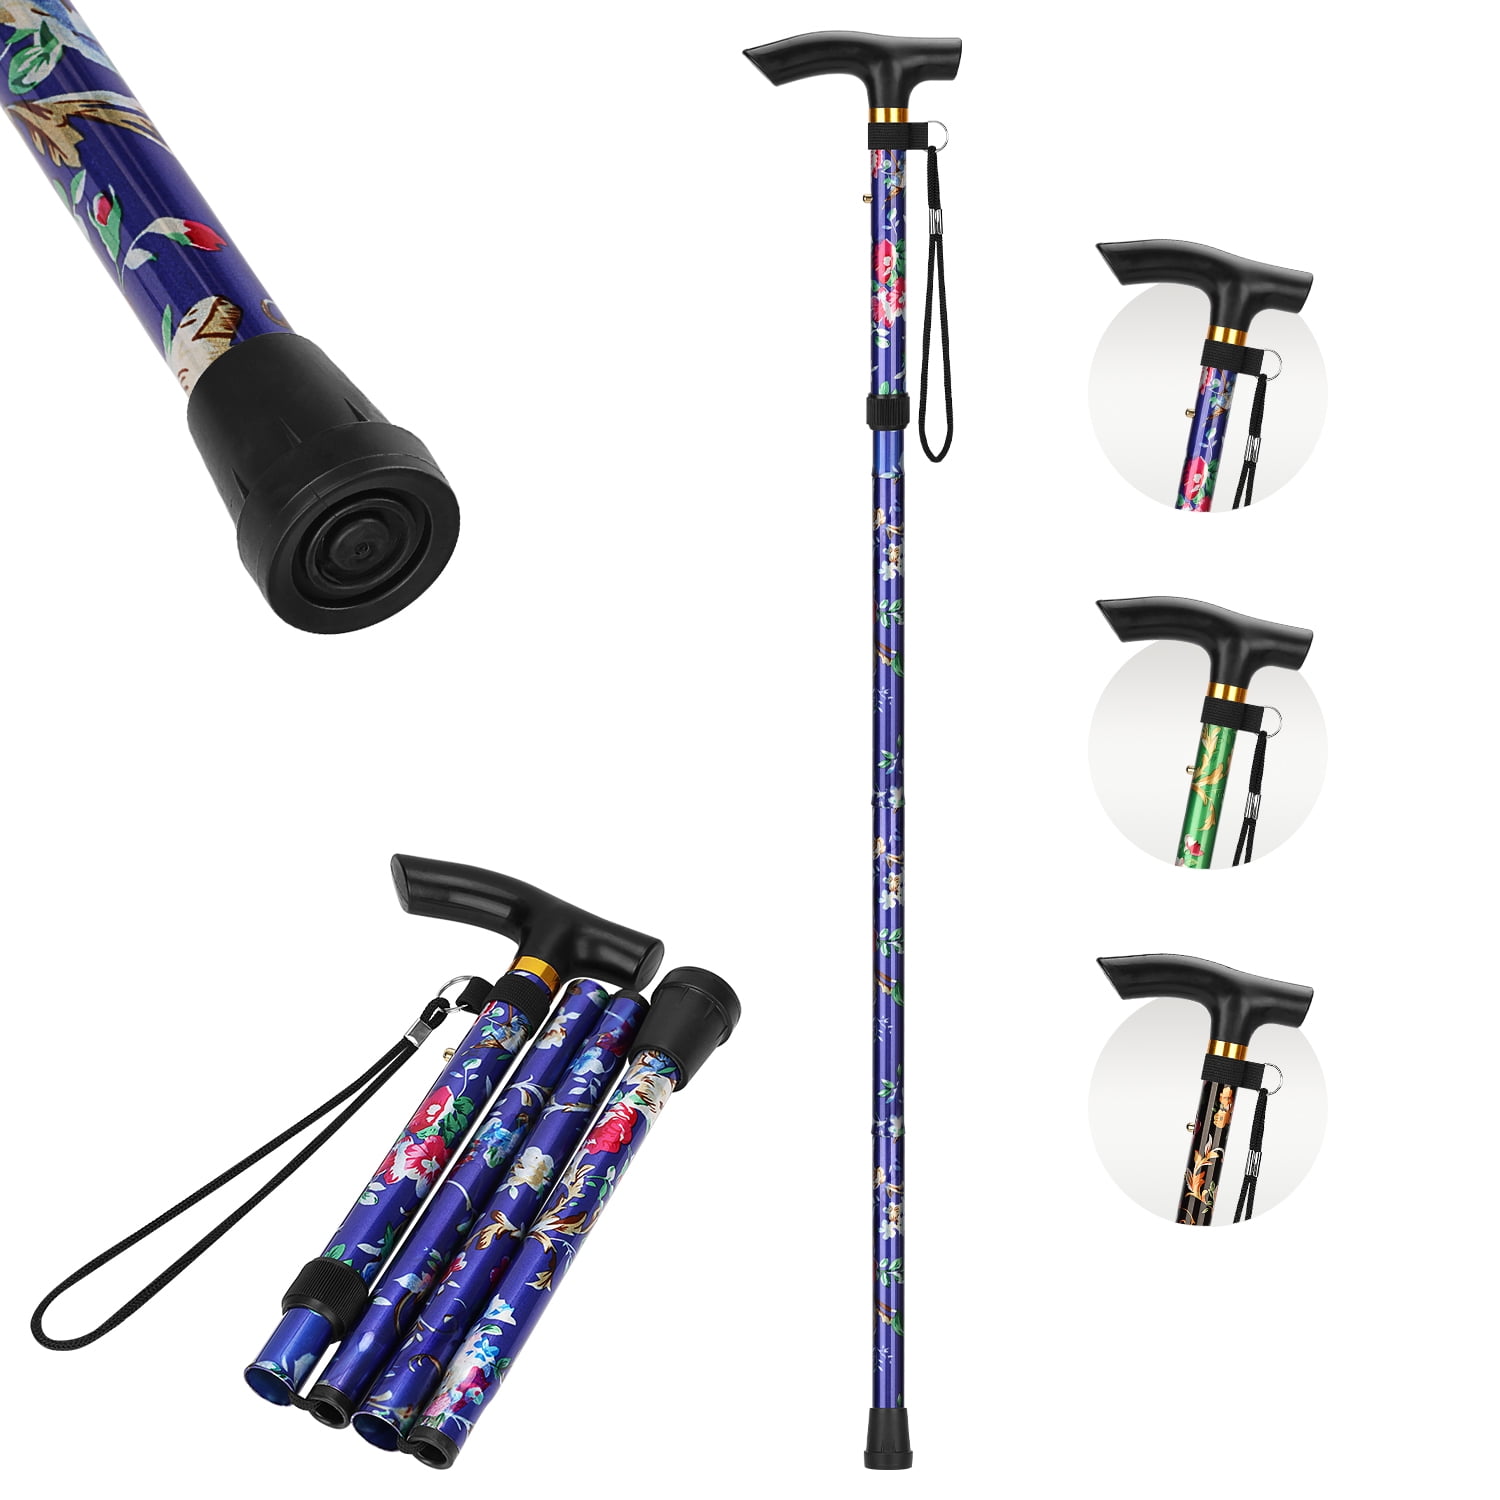 Entros Single Leg Foldable Walking Stick | Height Adjustable | Lightweight  Aluminum Cane with Anti-Skid Base, Offers Superior Stability | Ideal for